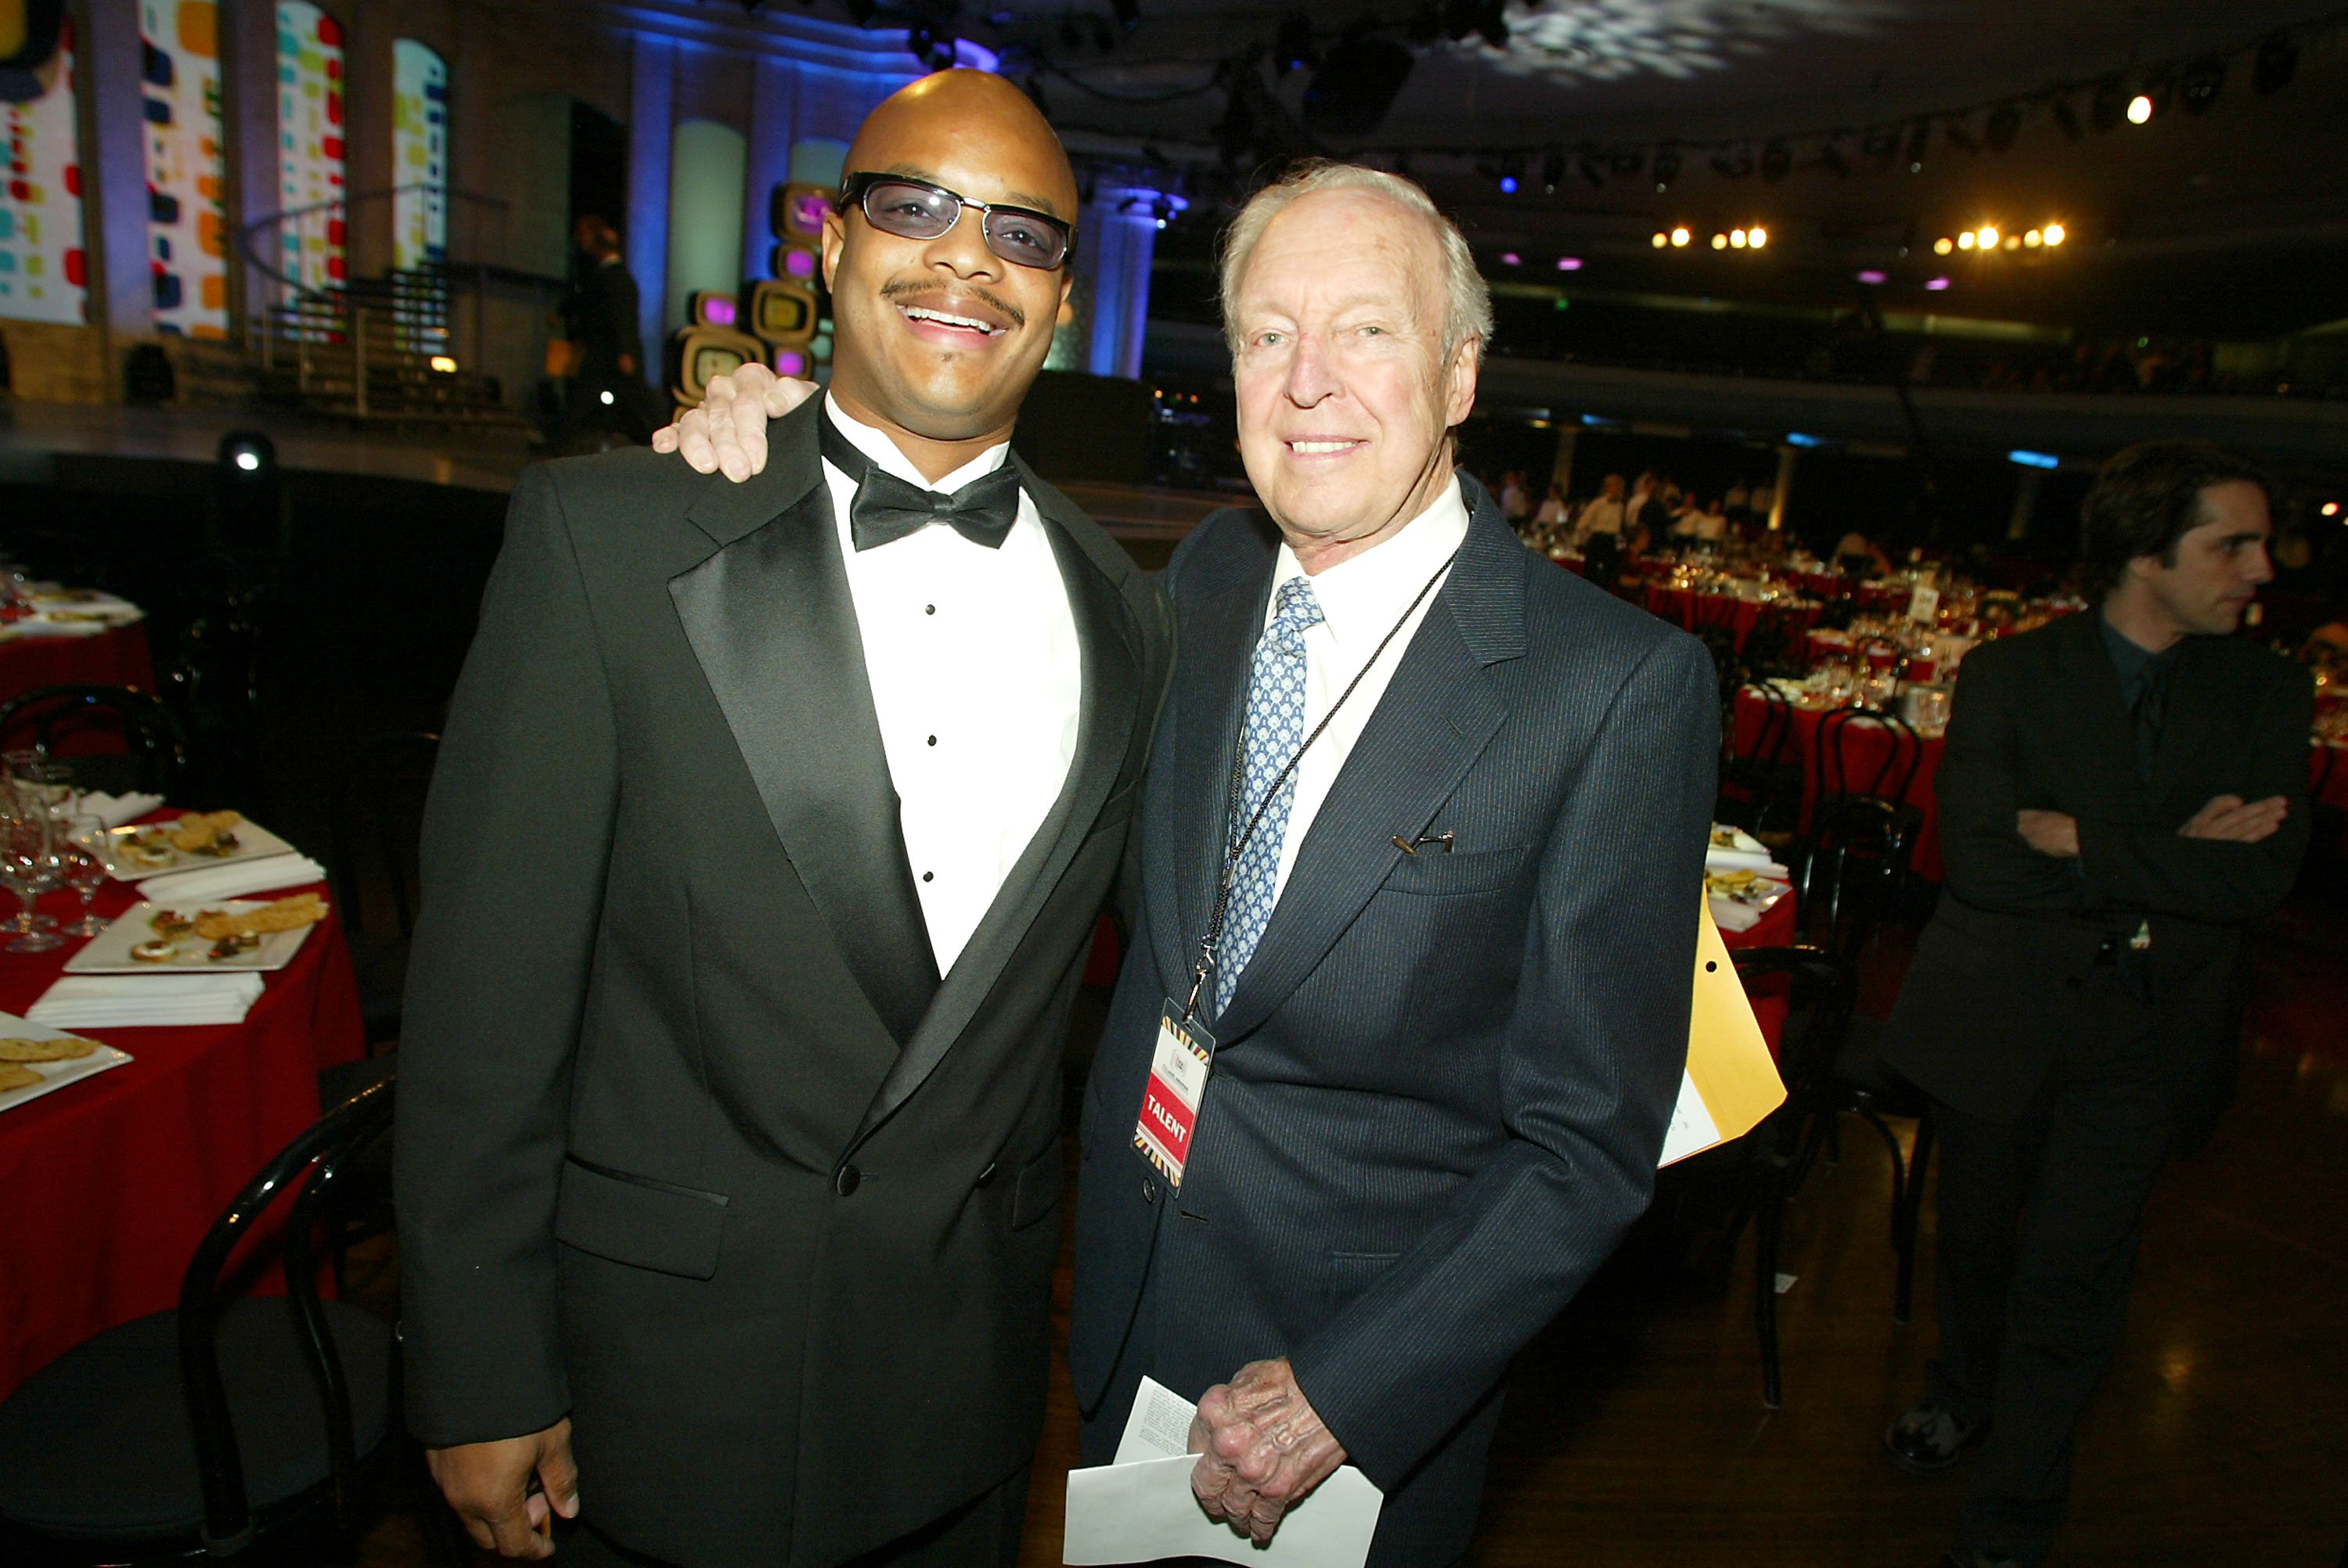 Actor Todd Bridges poses with Conrad Bain during the TV Land Awards 2003 at the Hollywood Palladium in California. I Image: Getty Images.